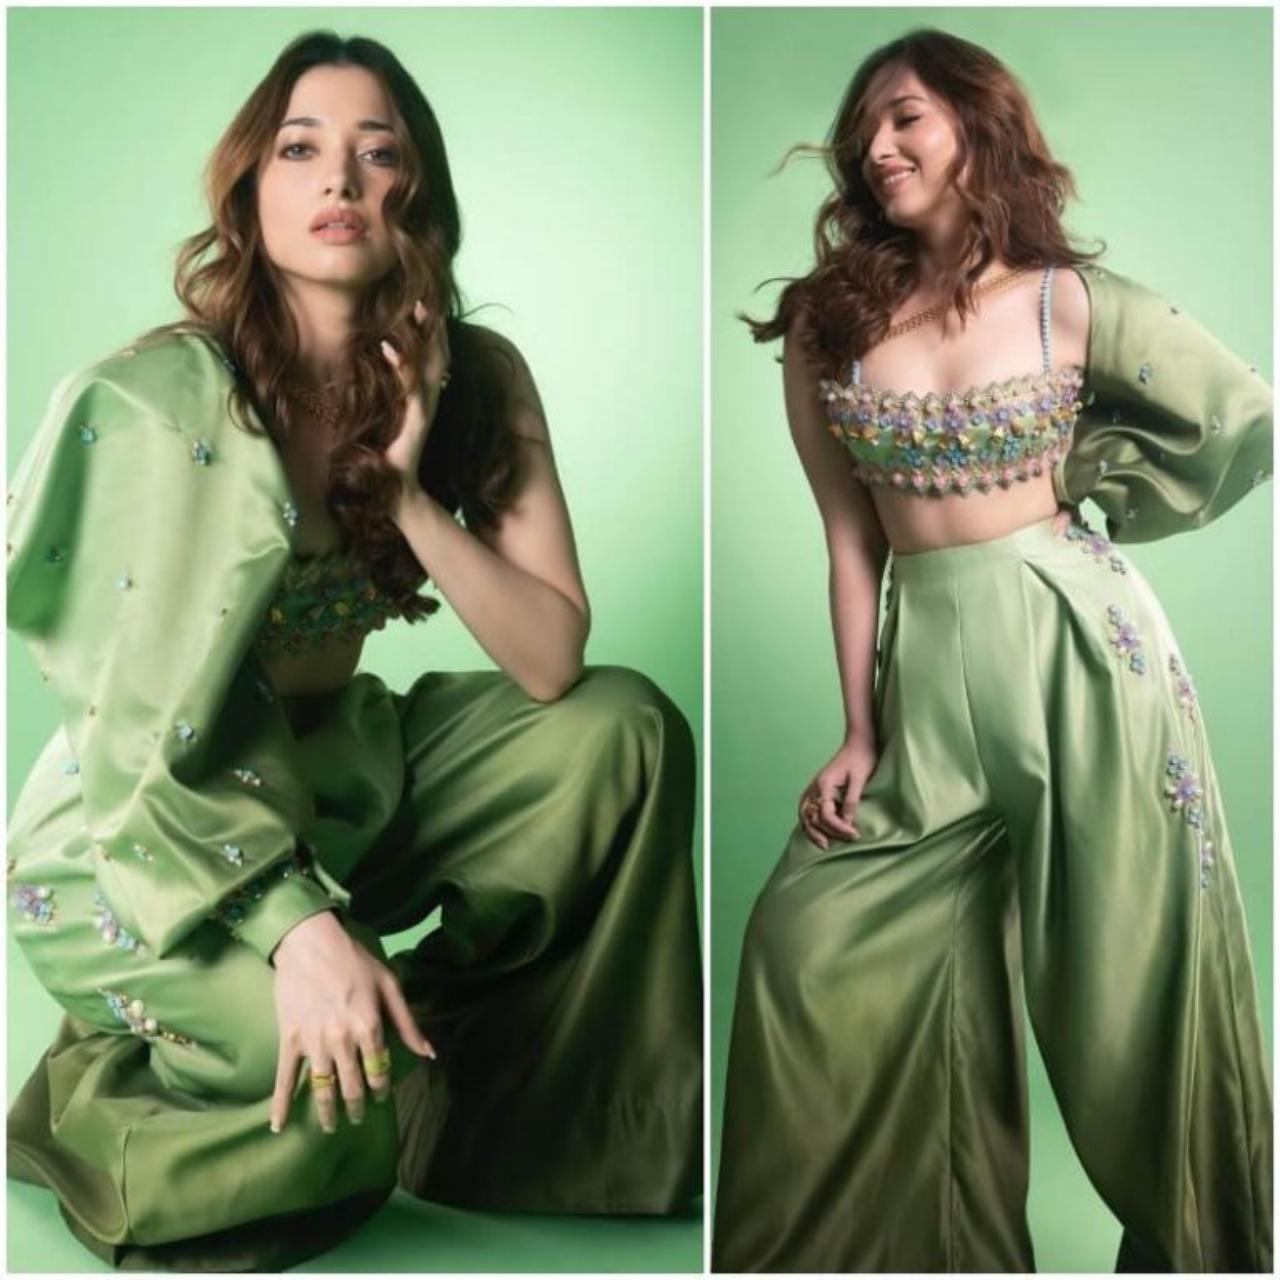 Tamannaah Bhatia is fast rising as a cinematic icon to watch out for. Not only does she stun on screen, but also makes her fans swoon with photographs from her fashion photoshoots. Bhatia looks drop-dead gorgeous in her sequinned bralette and high-waisted green trousers. If you want to put a modern spin on your Hariyali Teej outfit this year, Tamannaah is the one to follow!